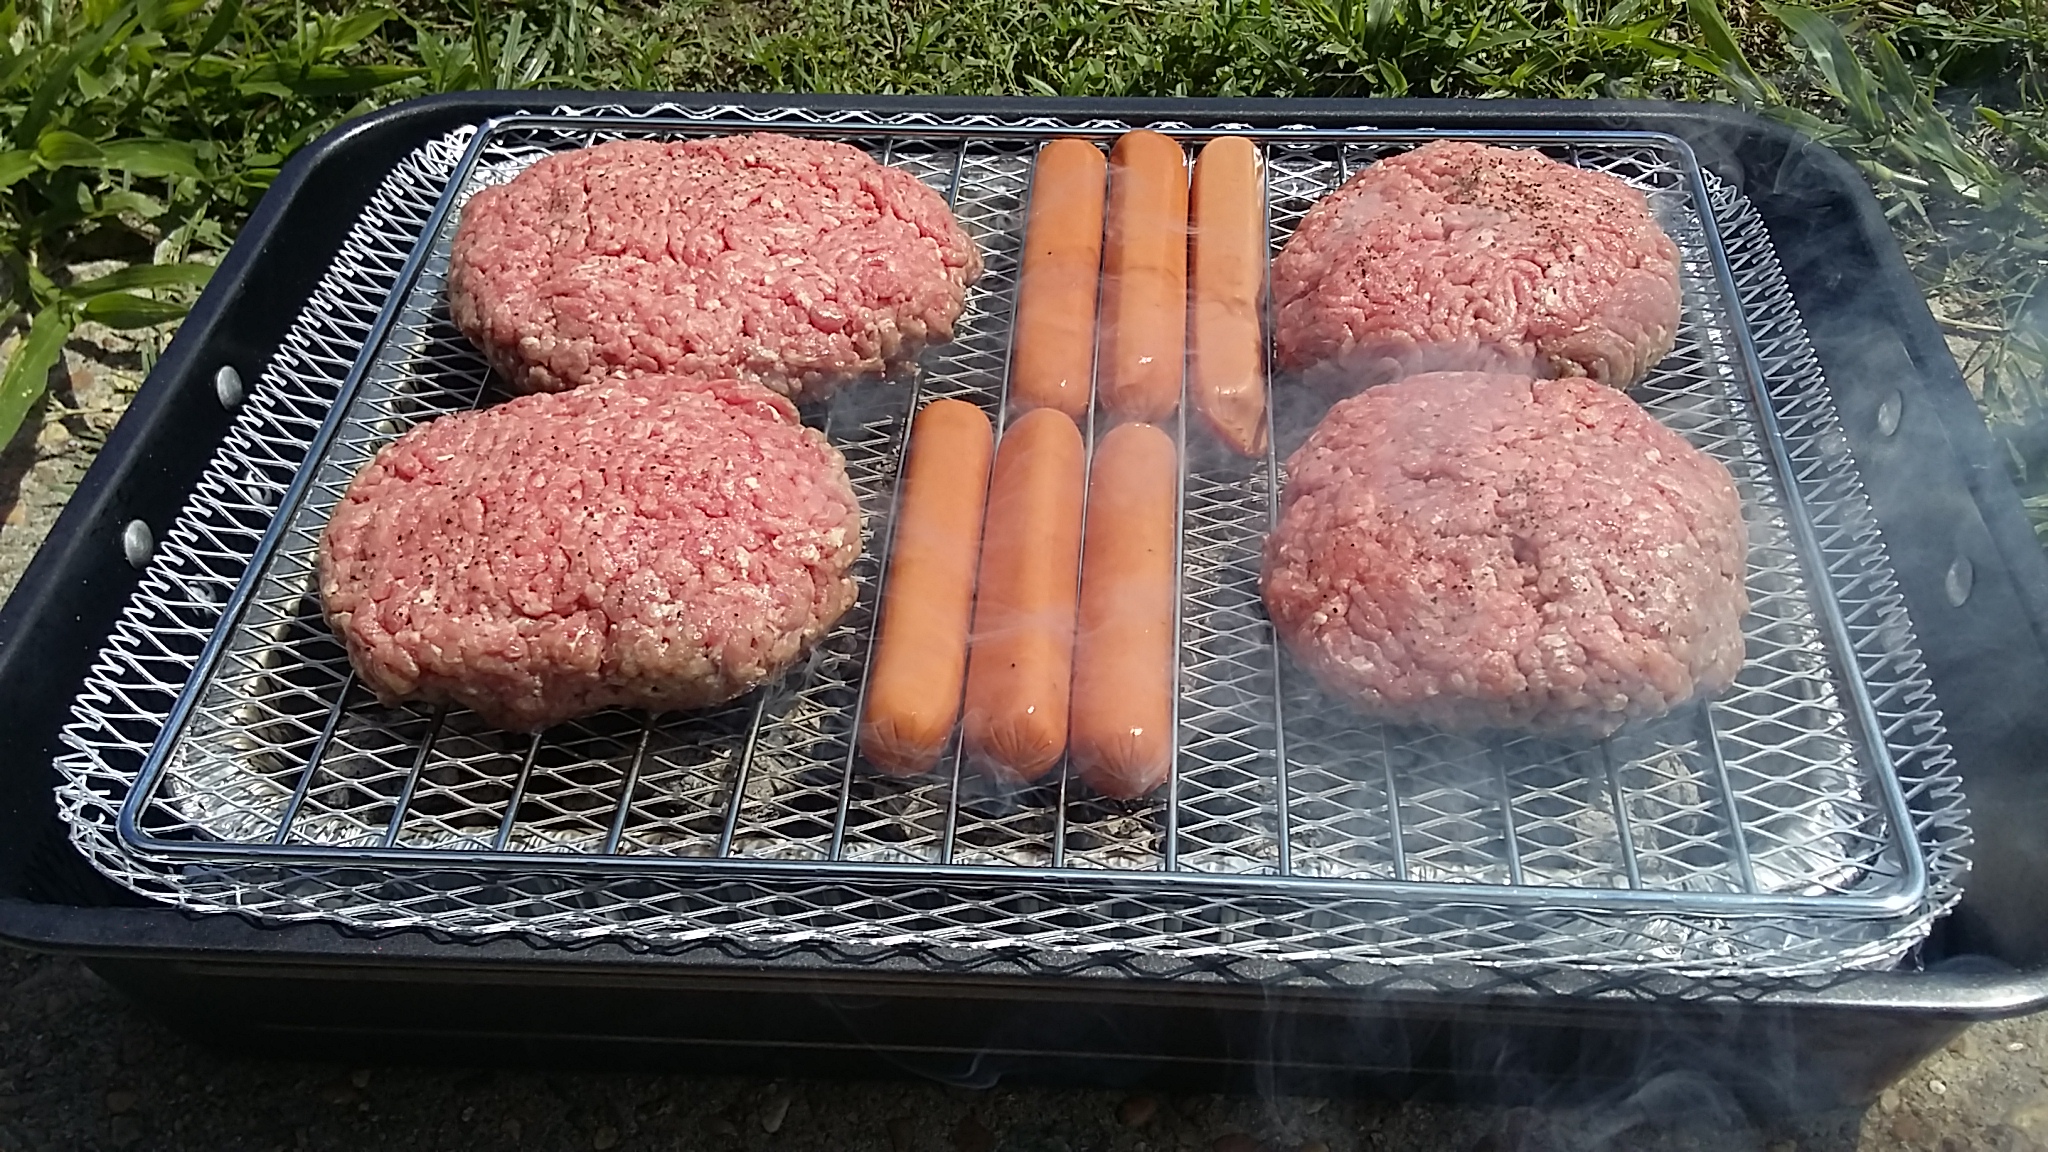 D.I.Y. Portable Disposable Charcoal Grill #SummerIsForSavings #CollectiveBias #WFM2 #AD